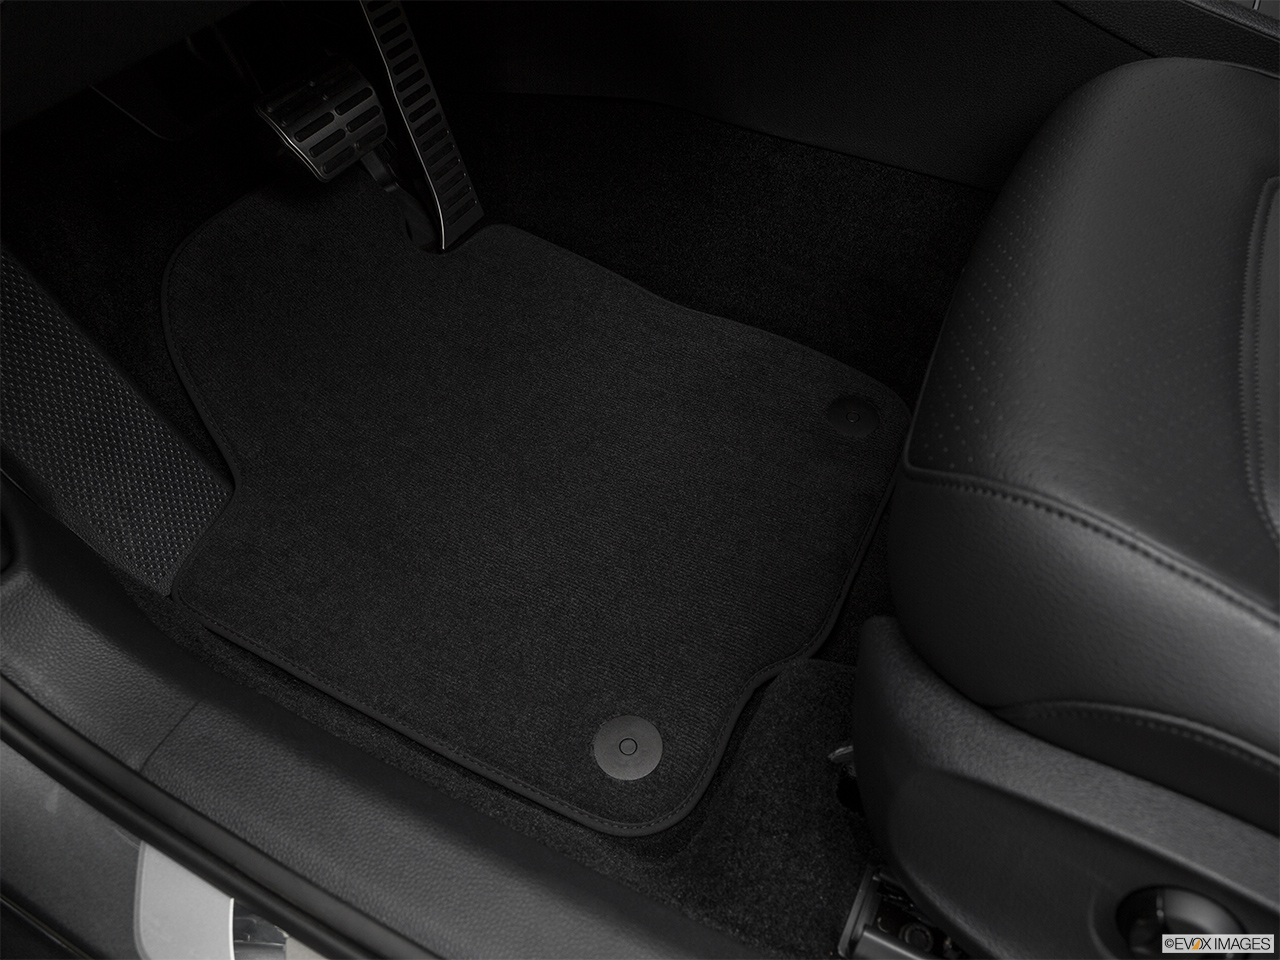 2018 Volkswagen Passat R-Line Driver's floor mat and pedals. Mid-seat level from outside looking in. 